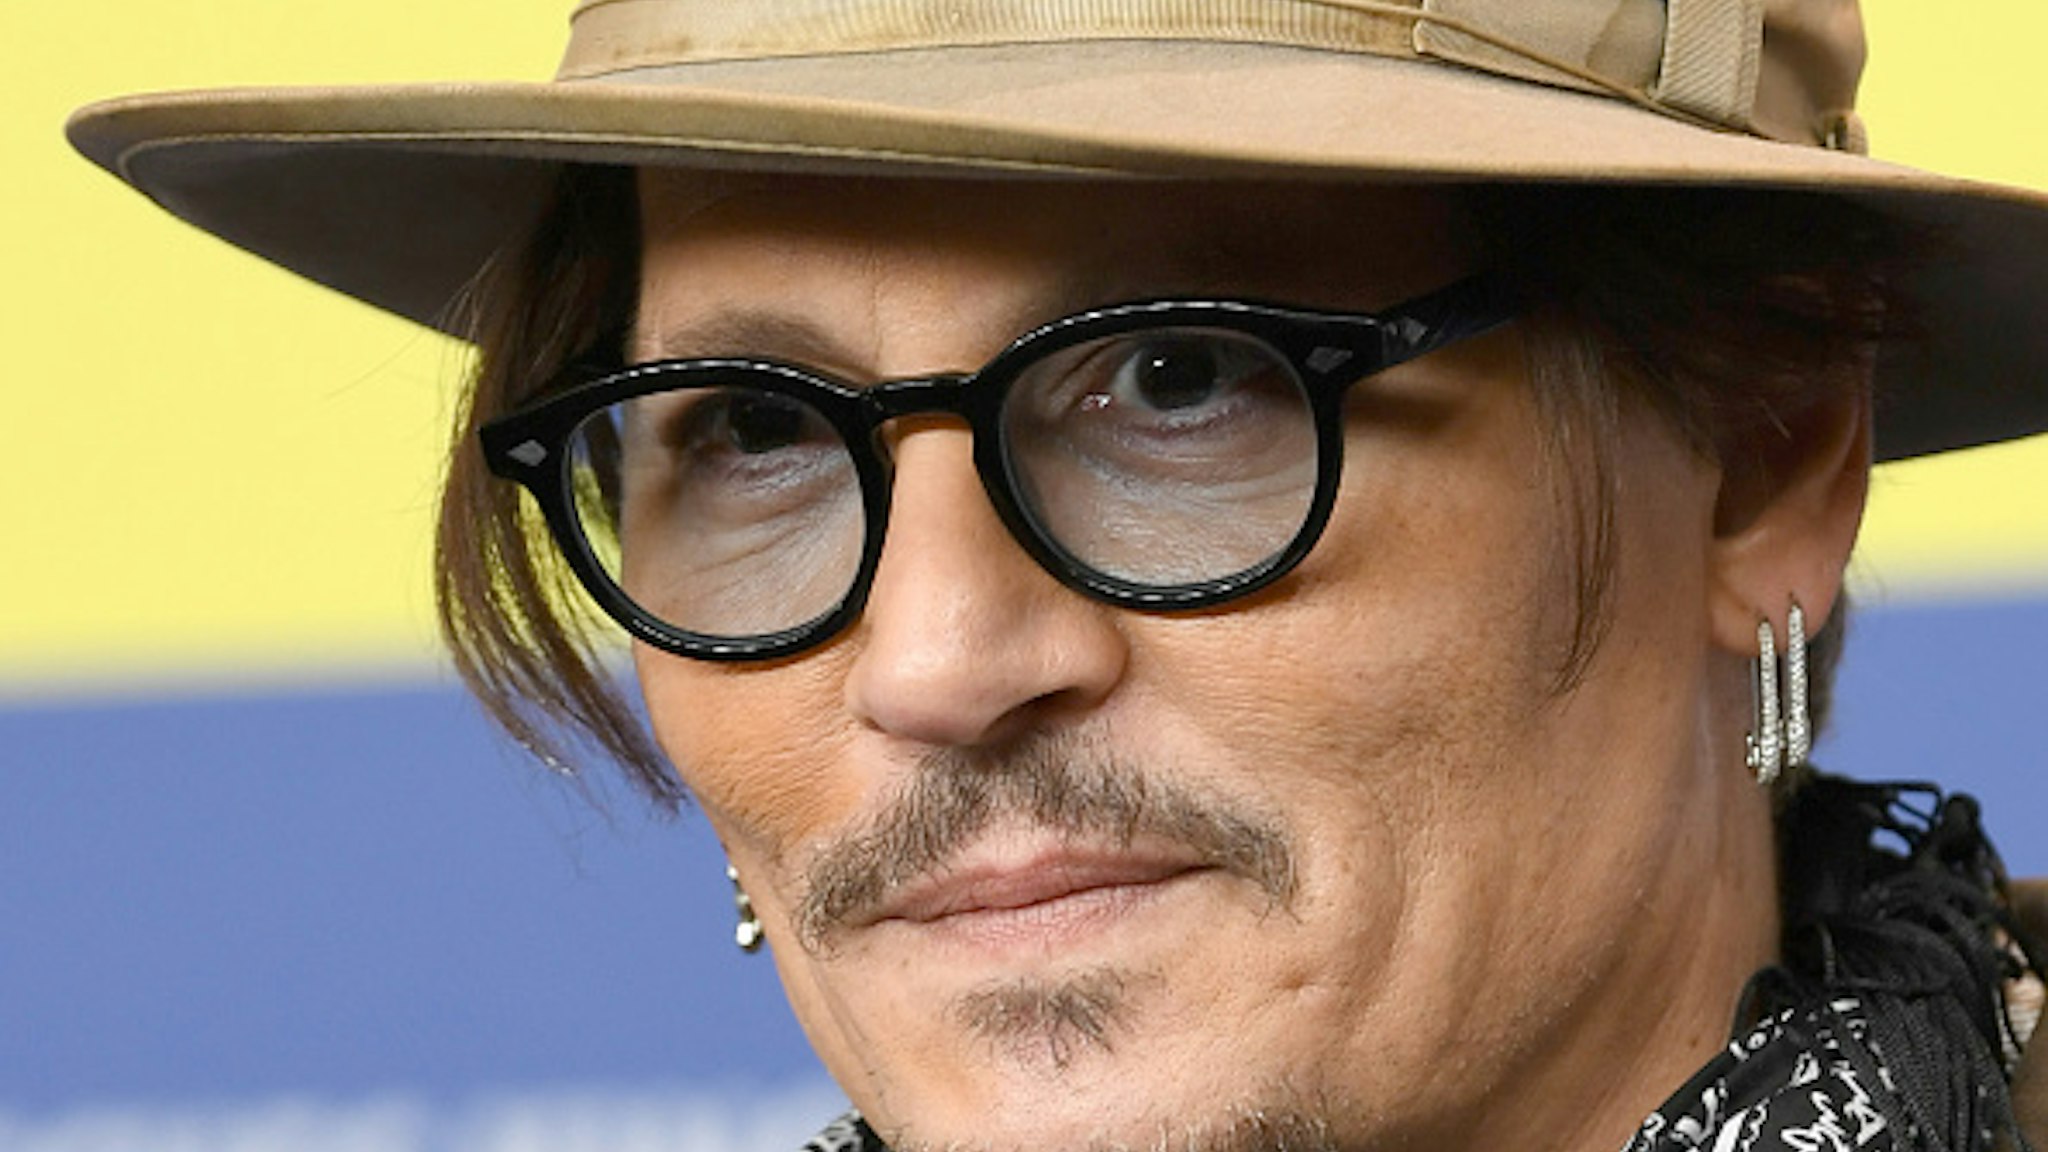 BERLIN, GERMANY - FEBRUARY 21 2020 - Actor Johnny Depp attends the press conference for Minamata during the 70th Berlin International Film Festival at the Grand Hyatt Berlin.- PHOTOGRAPH BY Paul Treadway / Barcroft Studios / Future Publishing